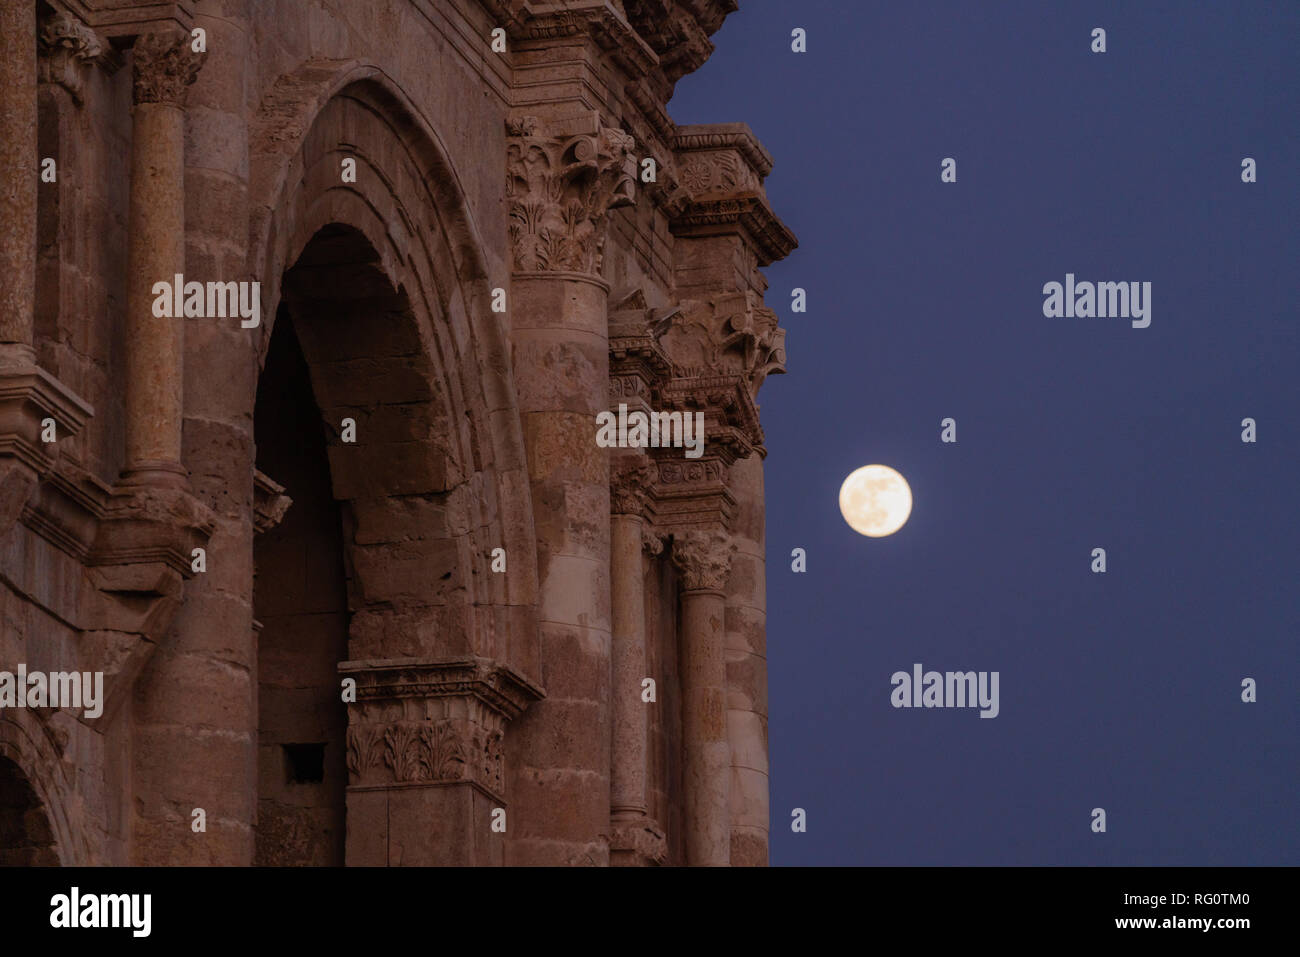 Ancient architecture detailed at night with full moon in Jerash in Amman, Jordan Stock Photo